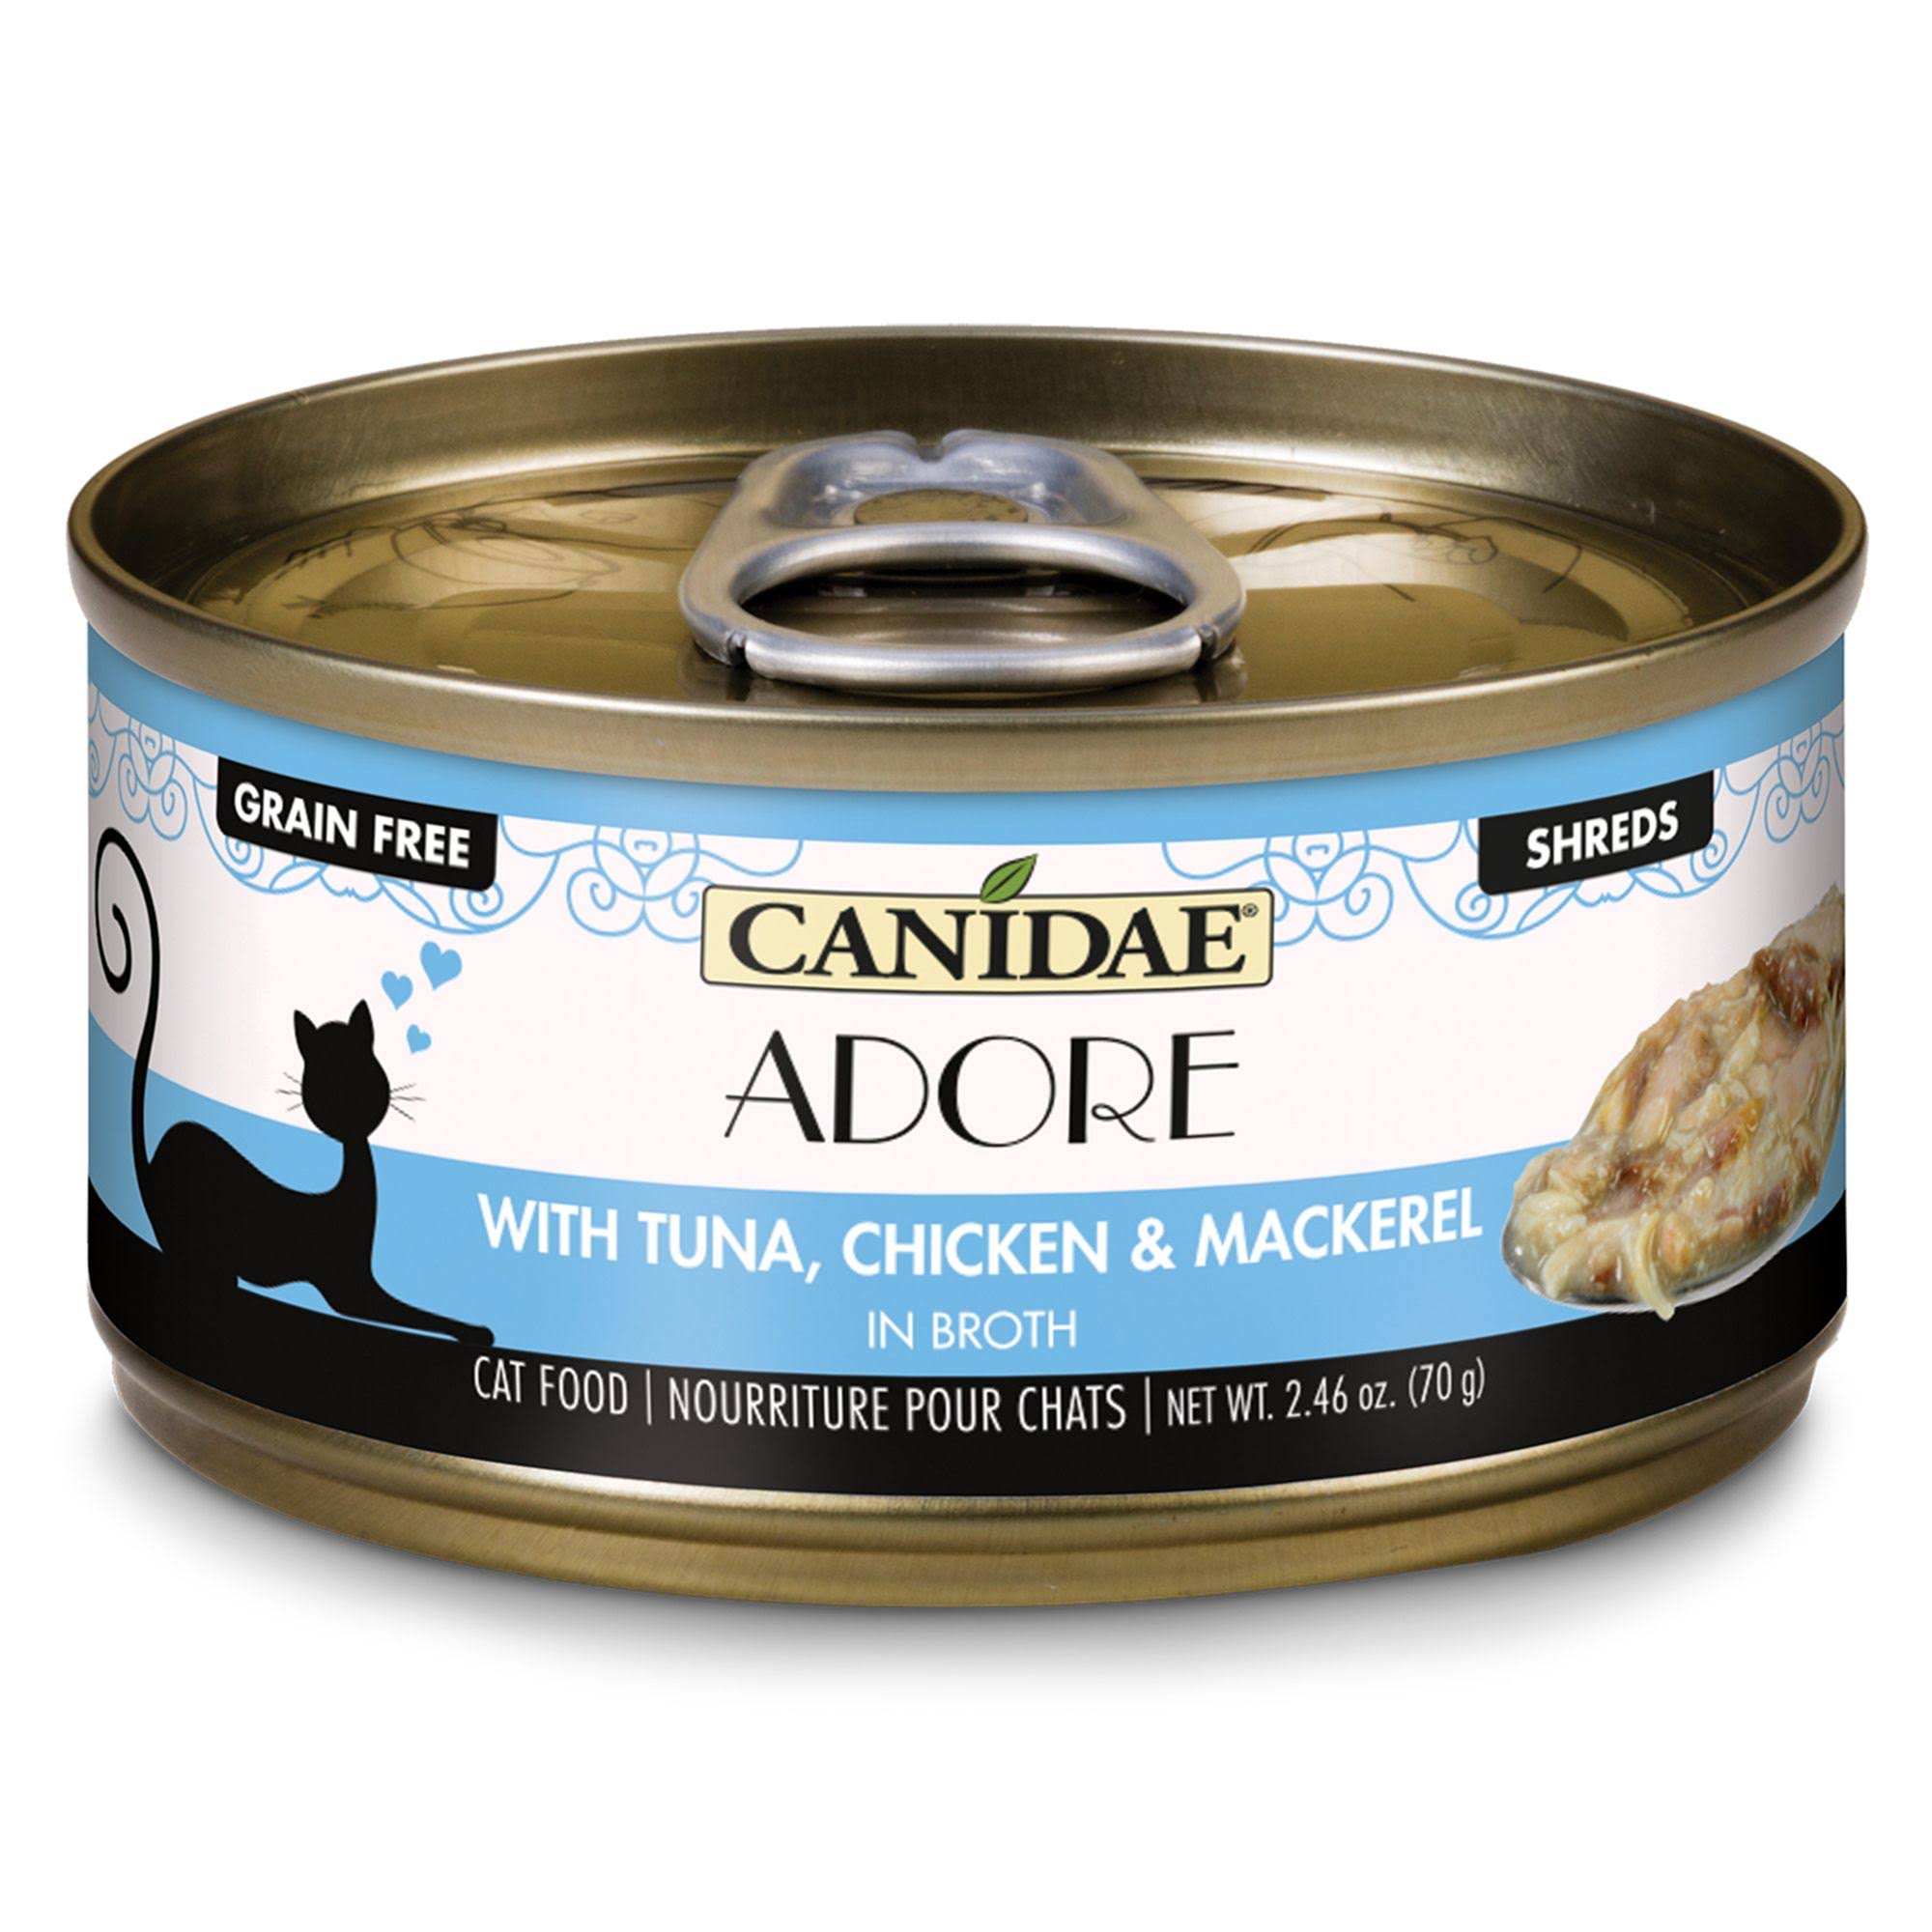 Canidae Grain Free Adore with Tuna, Chicken & Mackerel in Broth Cat Food Shreds - 2.46 oz